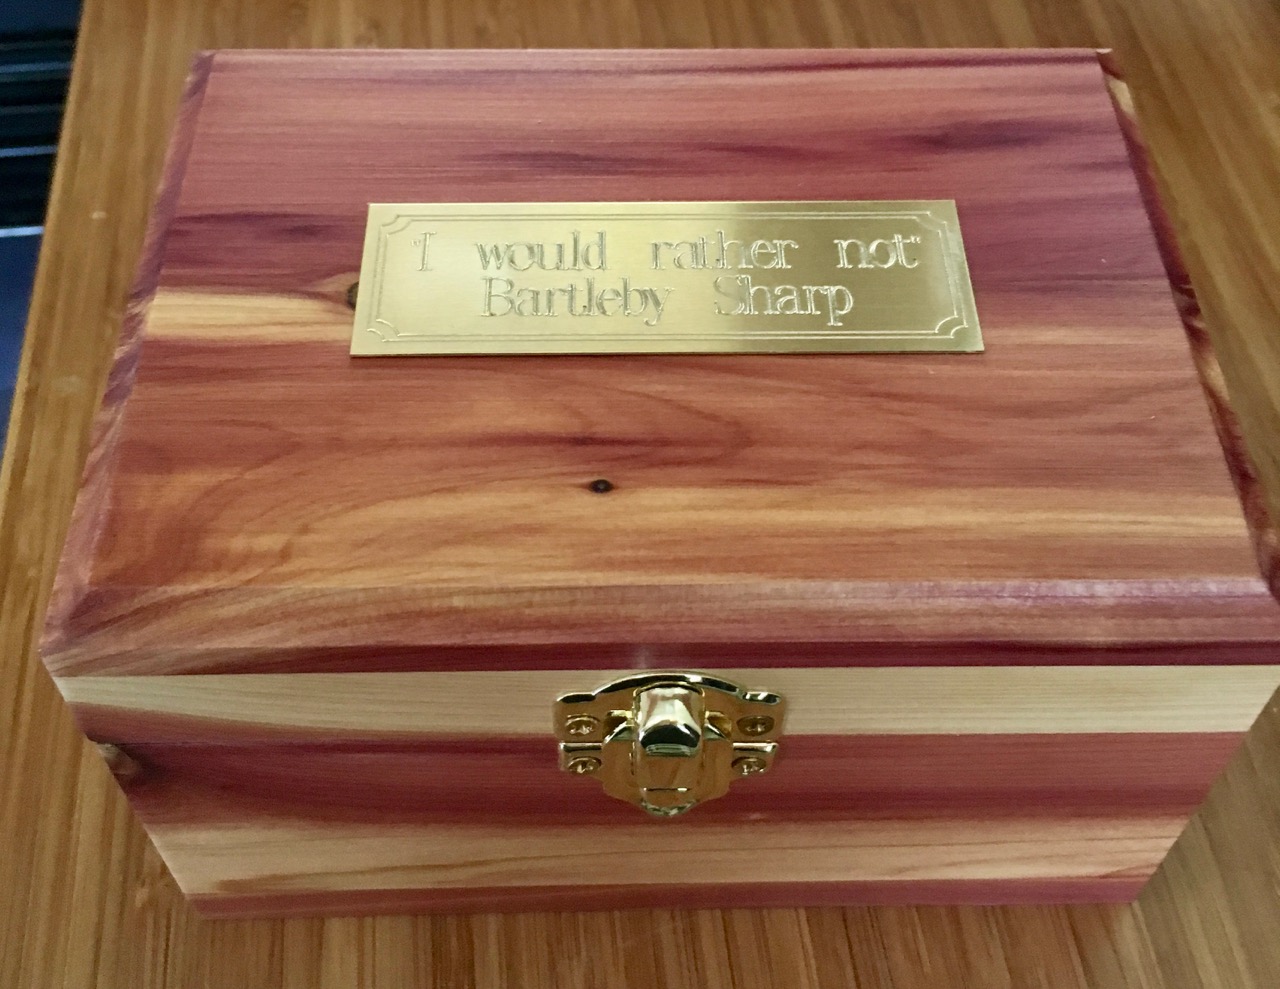 photo of box of ashes with engraved plate that says "I would rather not"